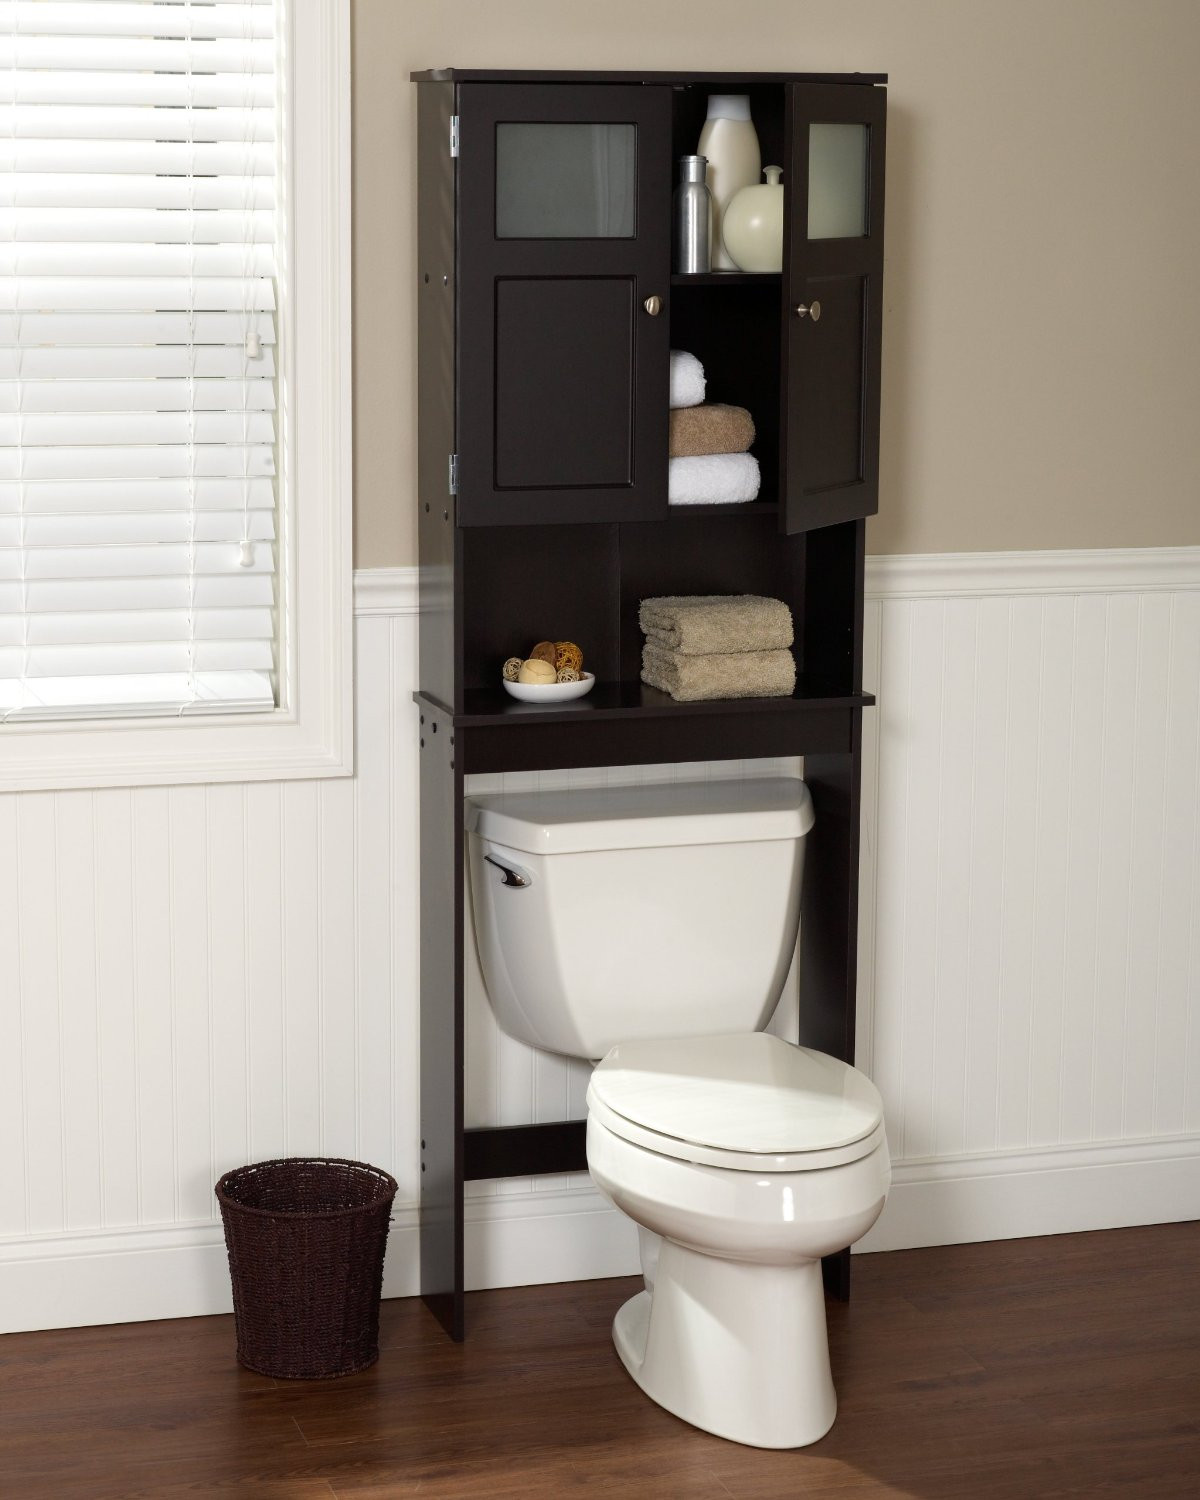 Over The Bathroom Storage
 The Best Over The Toilet Storage Options 2017